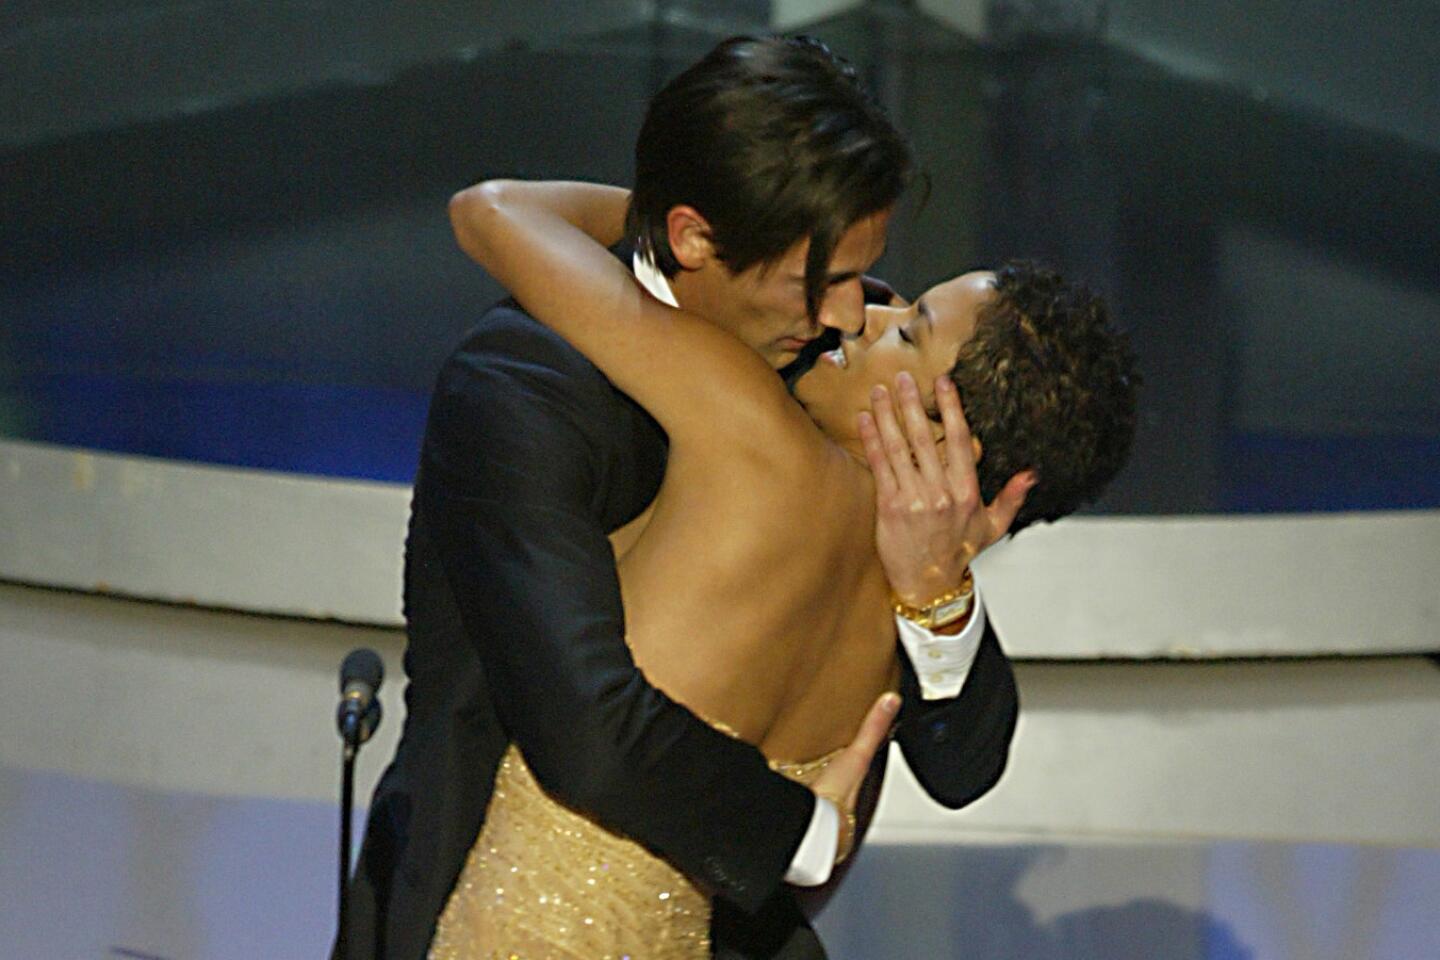 Apparently, when overcome with happiness, actor Adrien Brody's primal instinct tells him to latch his lips onto the pretty lady who gave him the news. Brody took everyone by surprise (especially Berry) when he kissed her after winning a lead actor Oscar for "The Pianist."